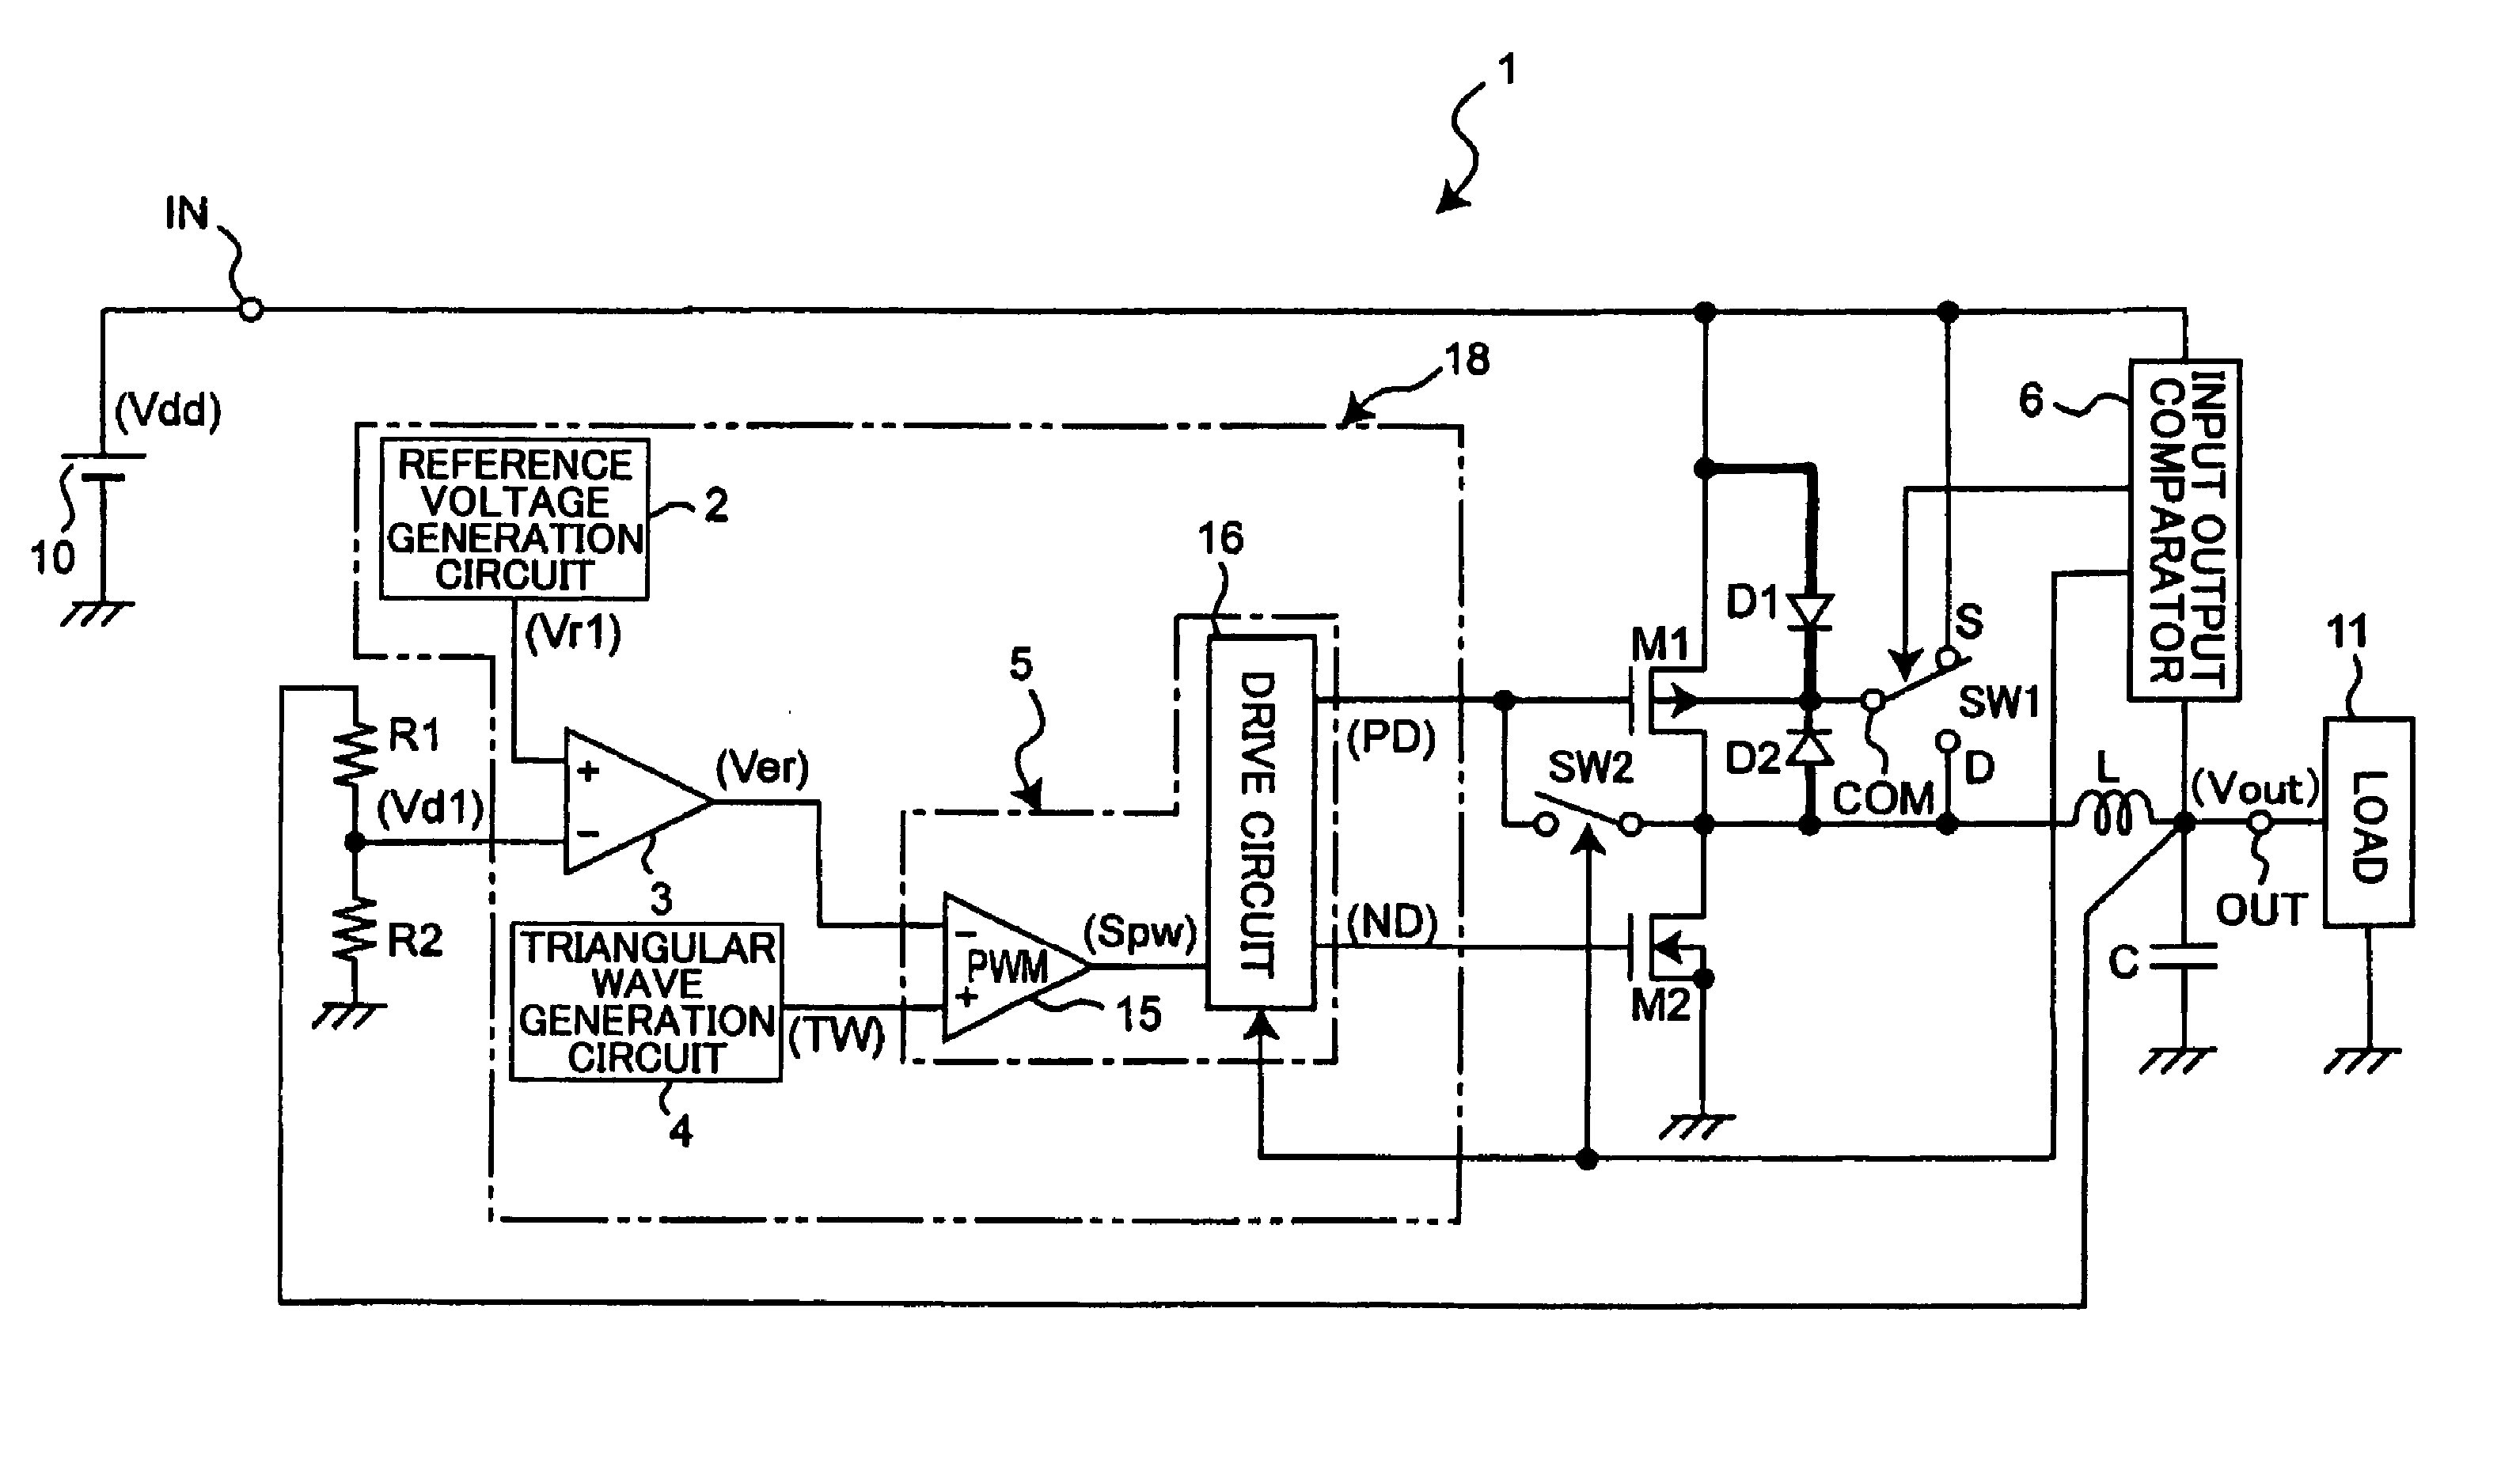 Step down switching regulator with the substrate of the switching transistor selectively connected to either its drain or source